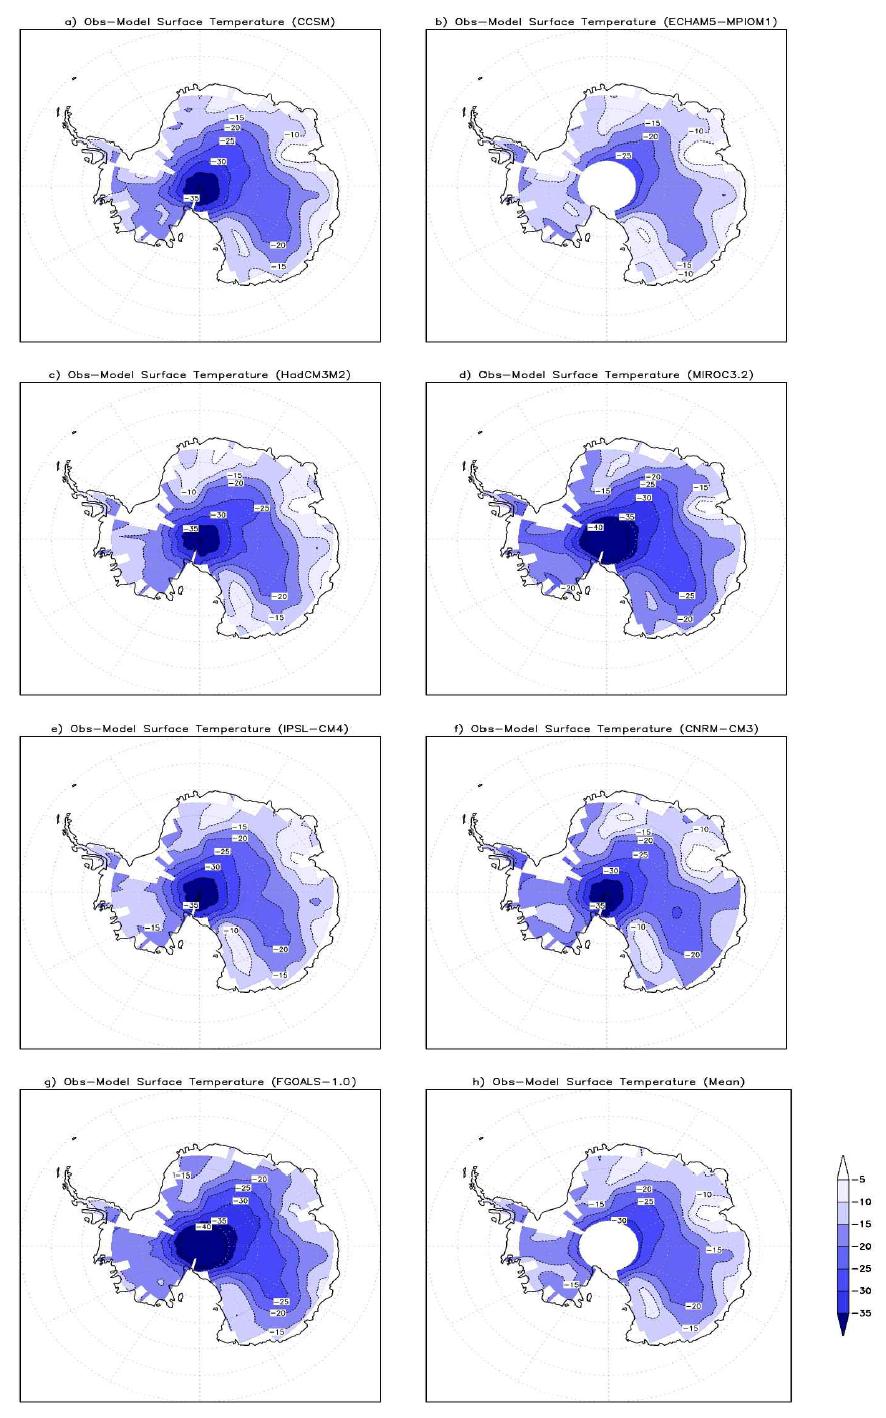 Annual mean difference between simulated 0 ka and observed surface air temperature.